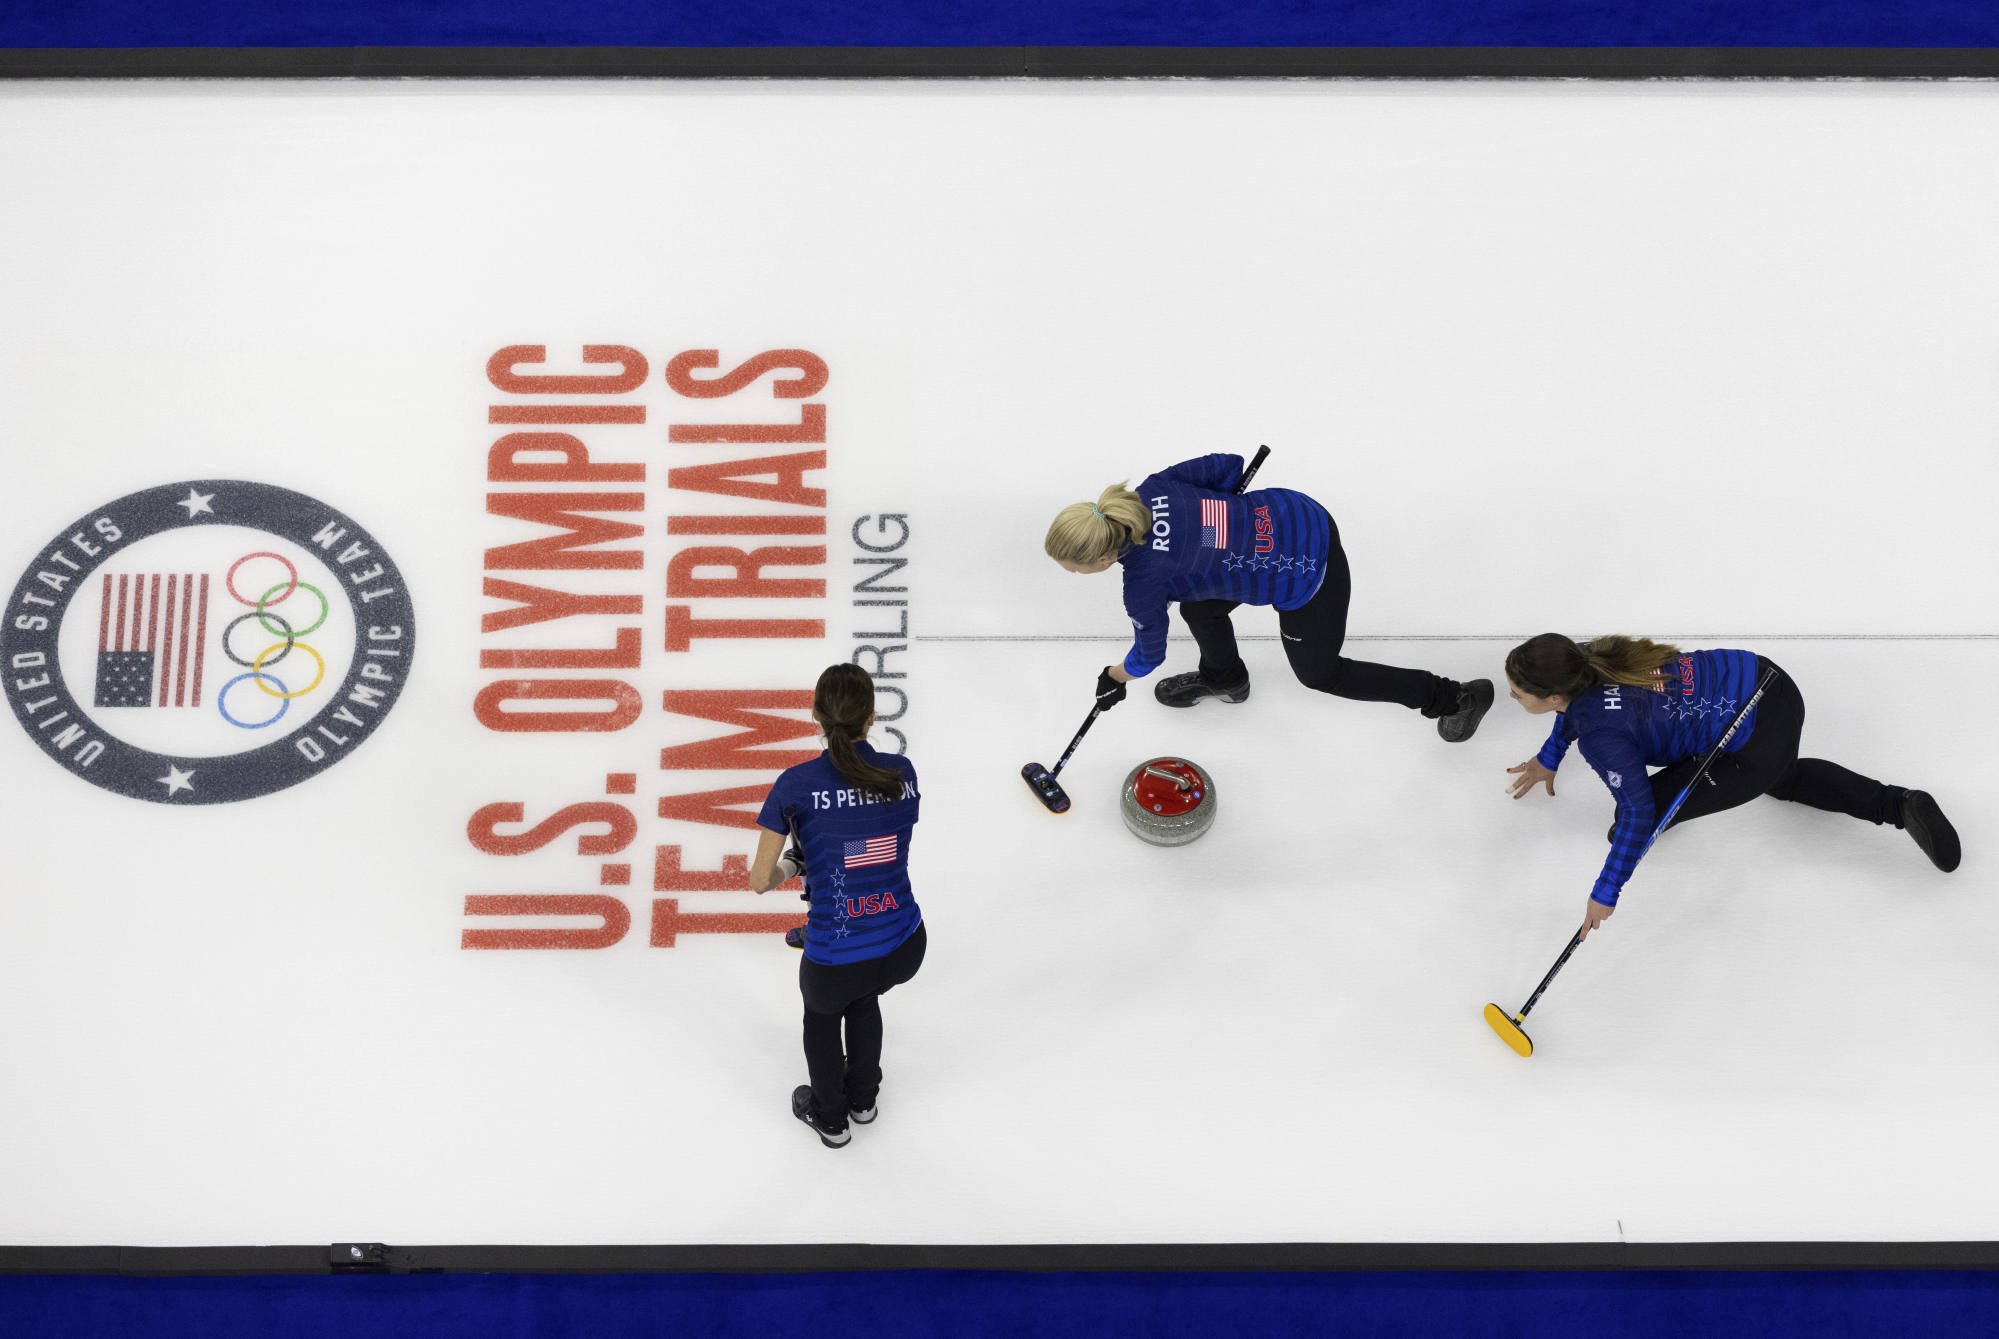 2022 Beijing Olympics: Standings for Men's Curling round robin competition  - DraftKings Network